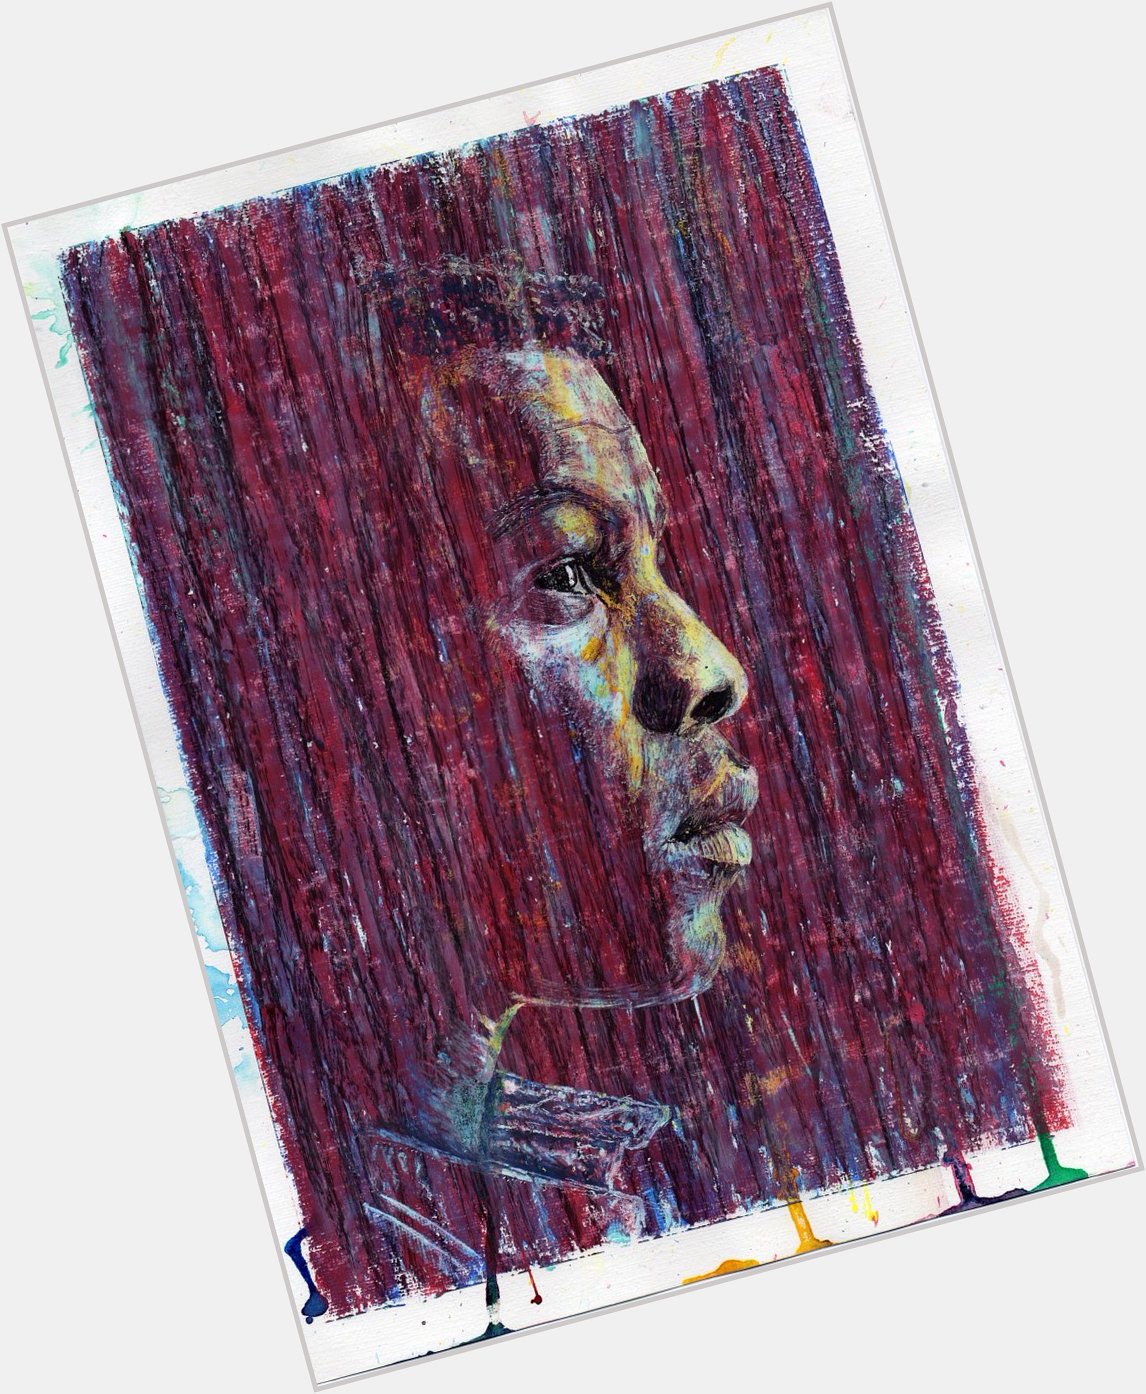 Happy 30th birthday John Boyega! This picture: oil and ink on acrylic paper, 21cm x 30cm. 